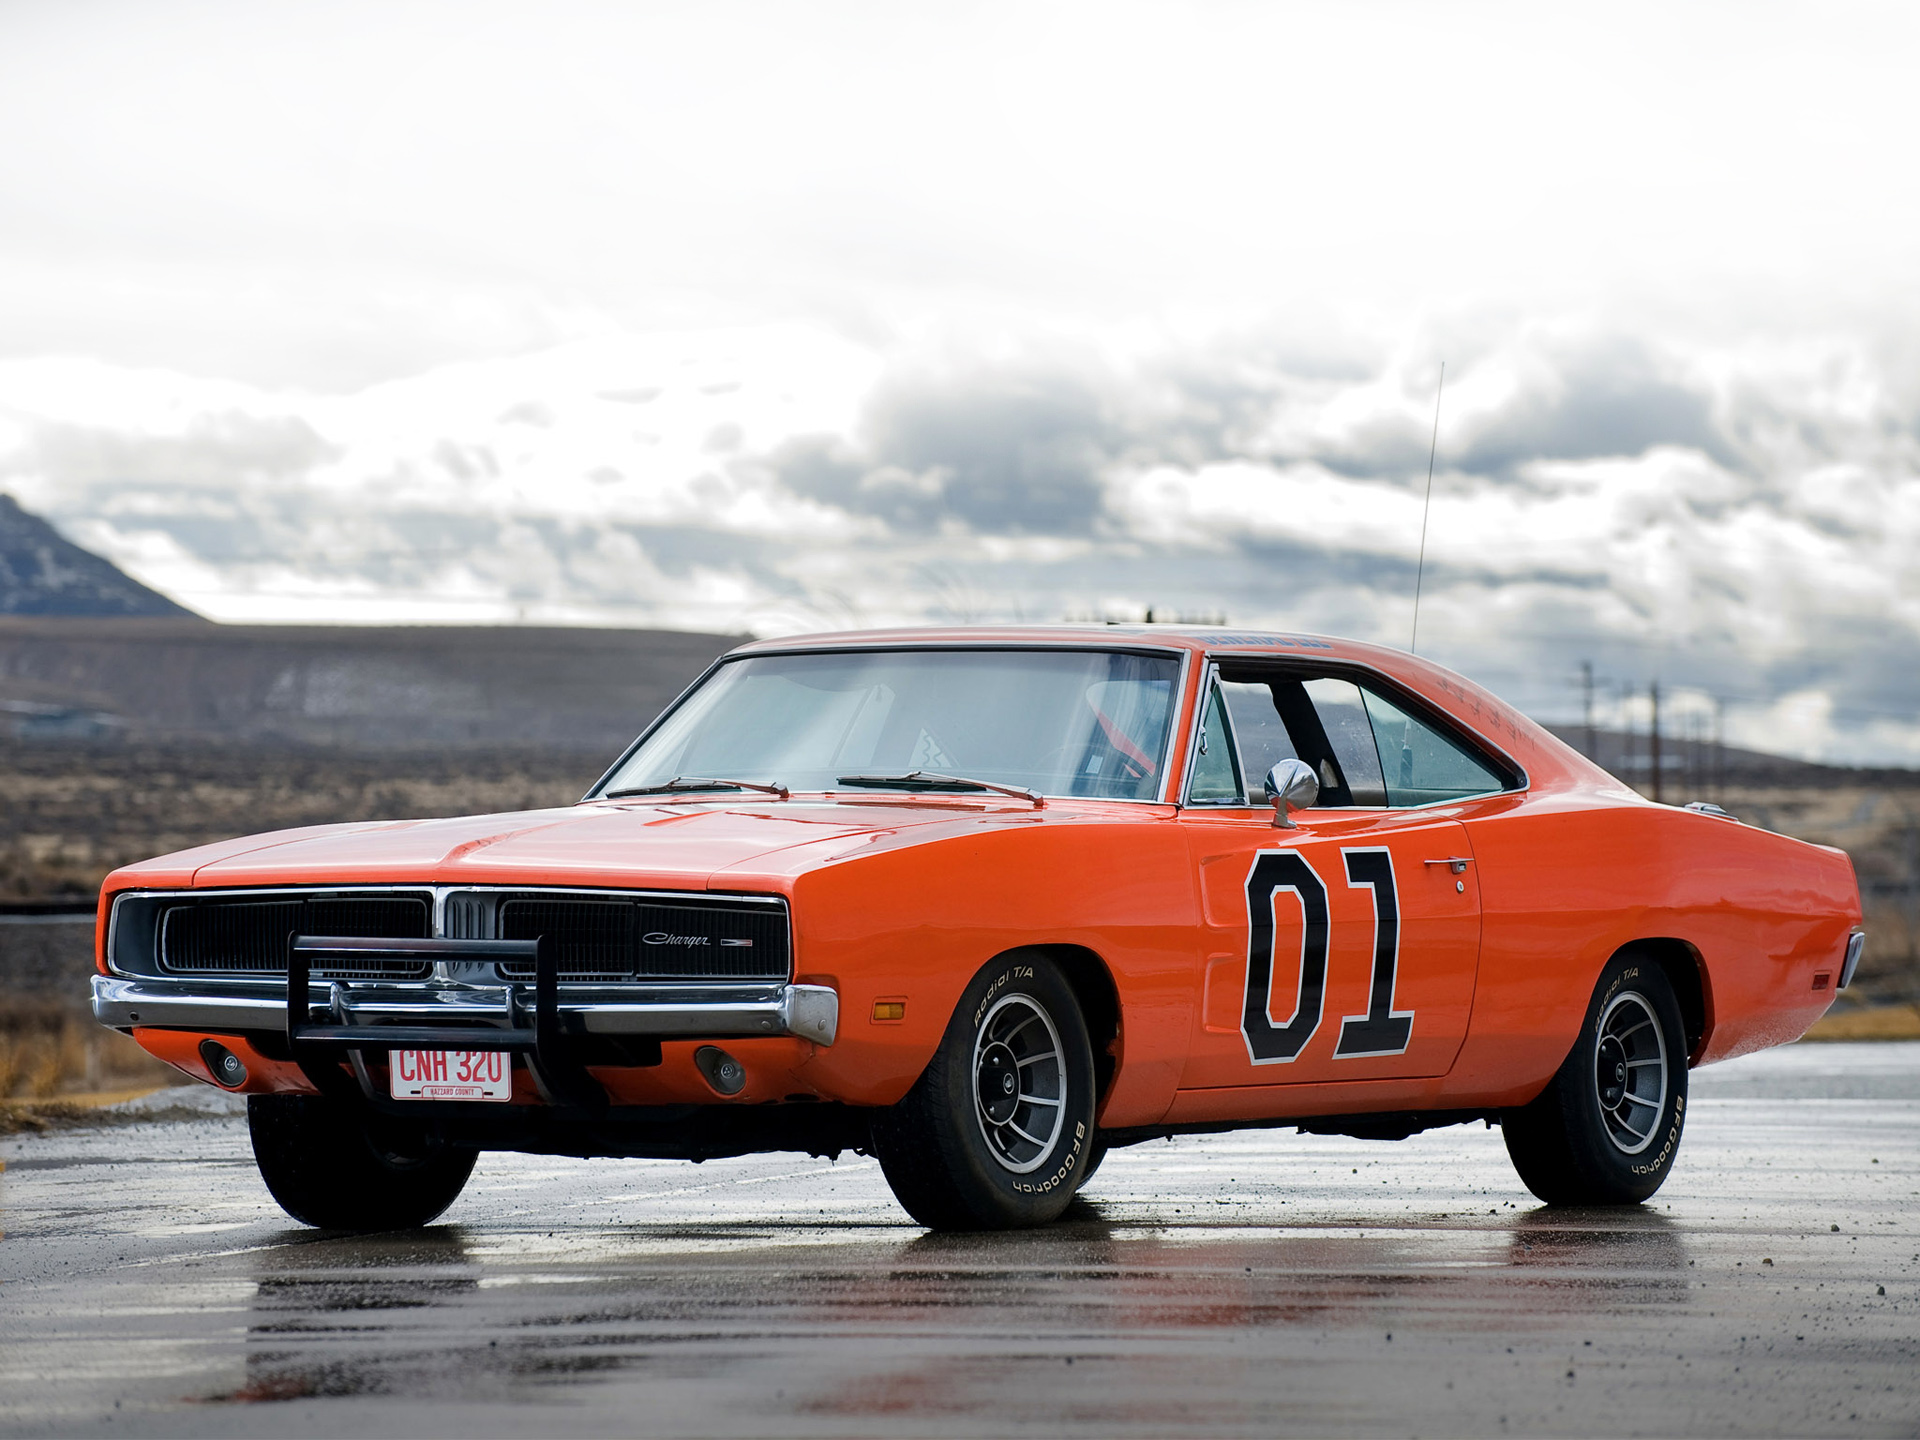 Gallery For Gt Dodge Charger Rt Wallpaper